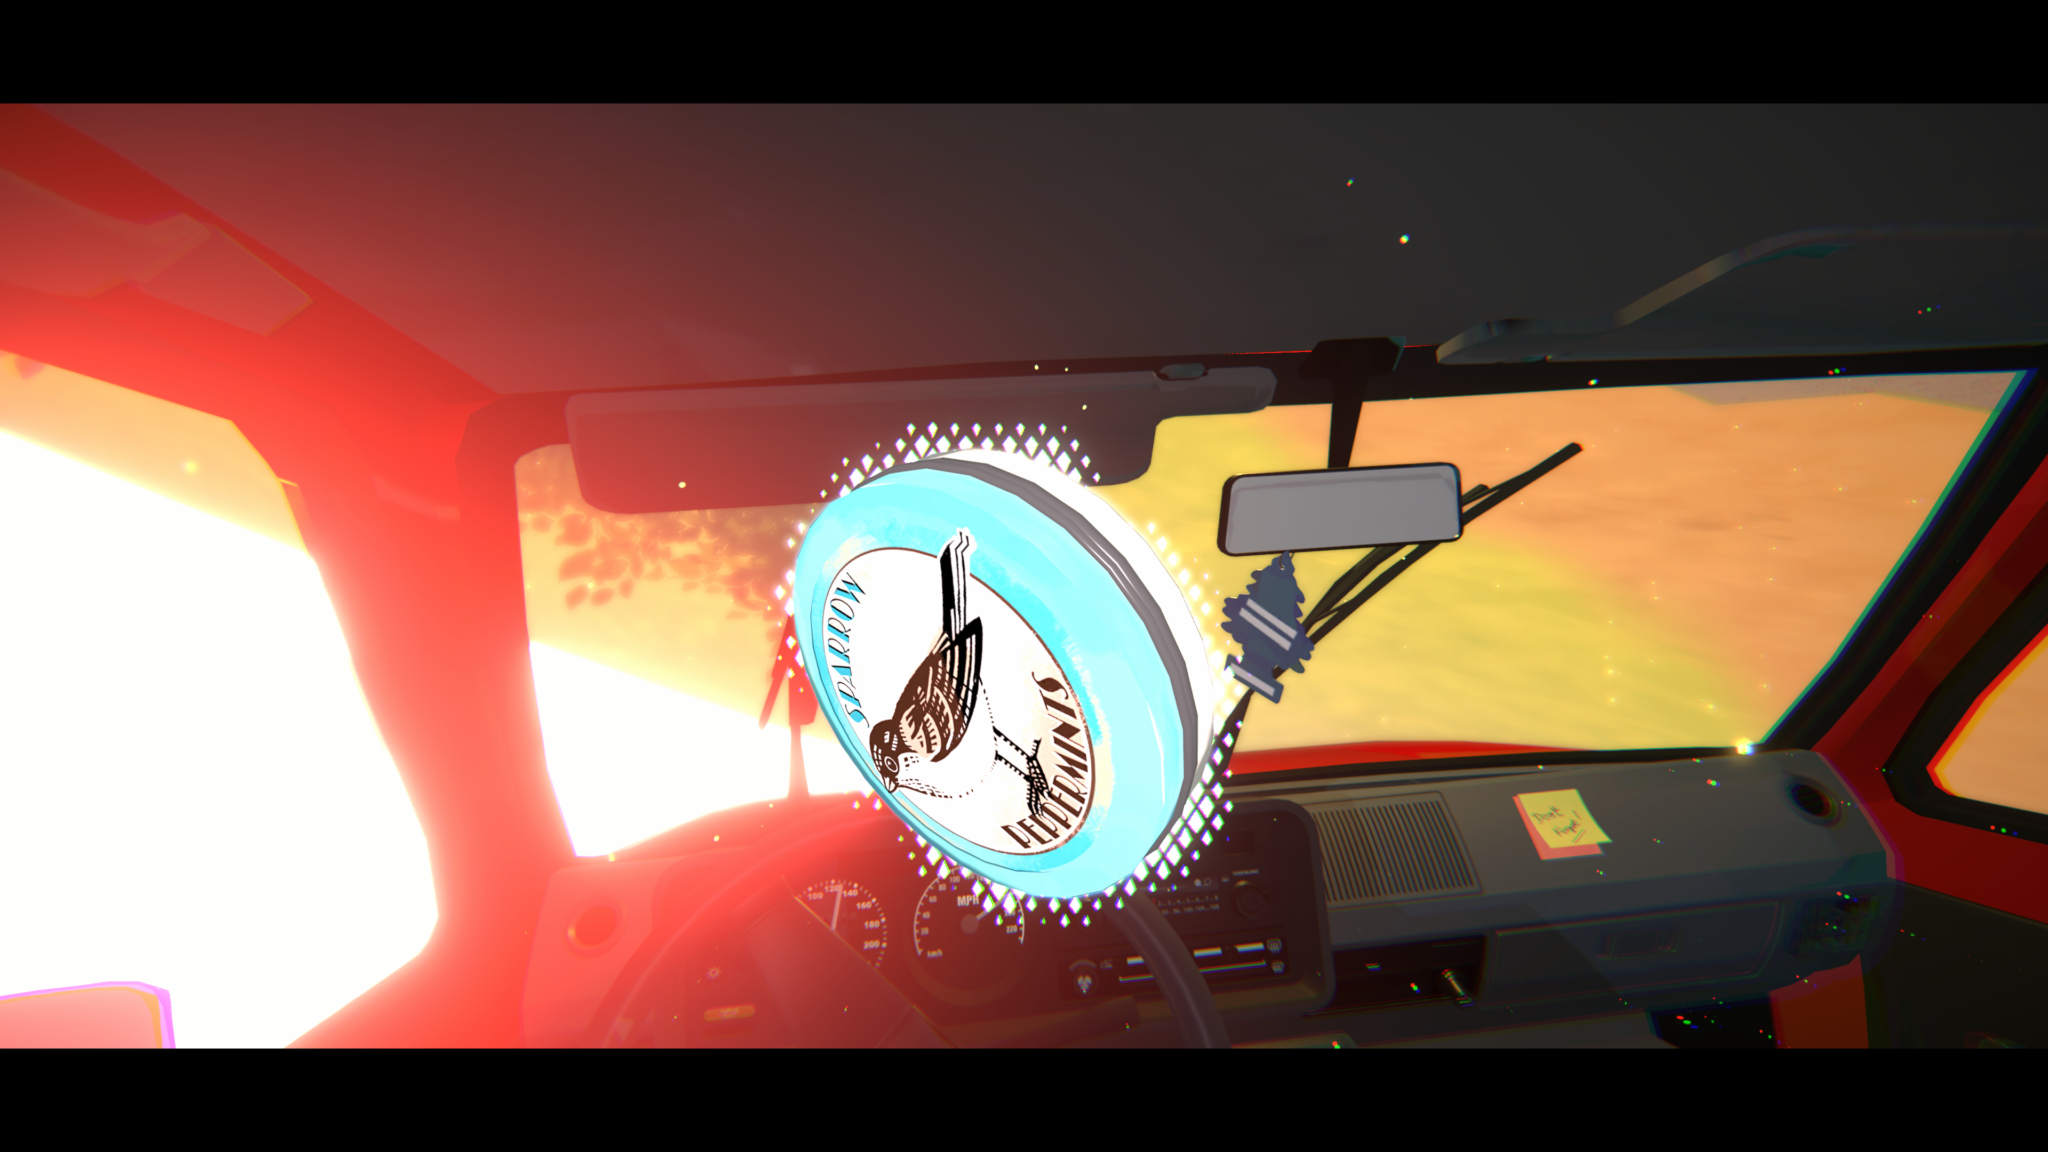 Screenshot from The Wreck of a tin of mints with a bird on it flying through the air in the crashing car